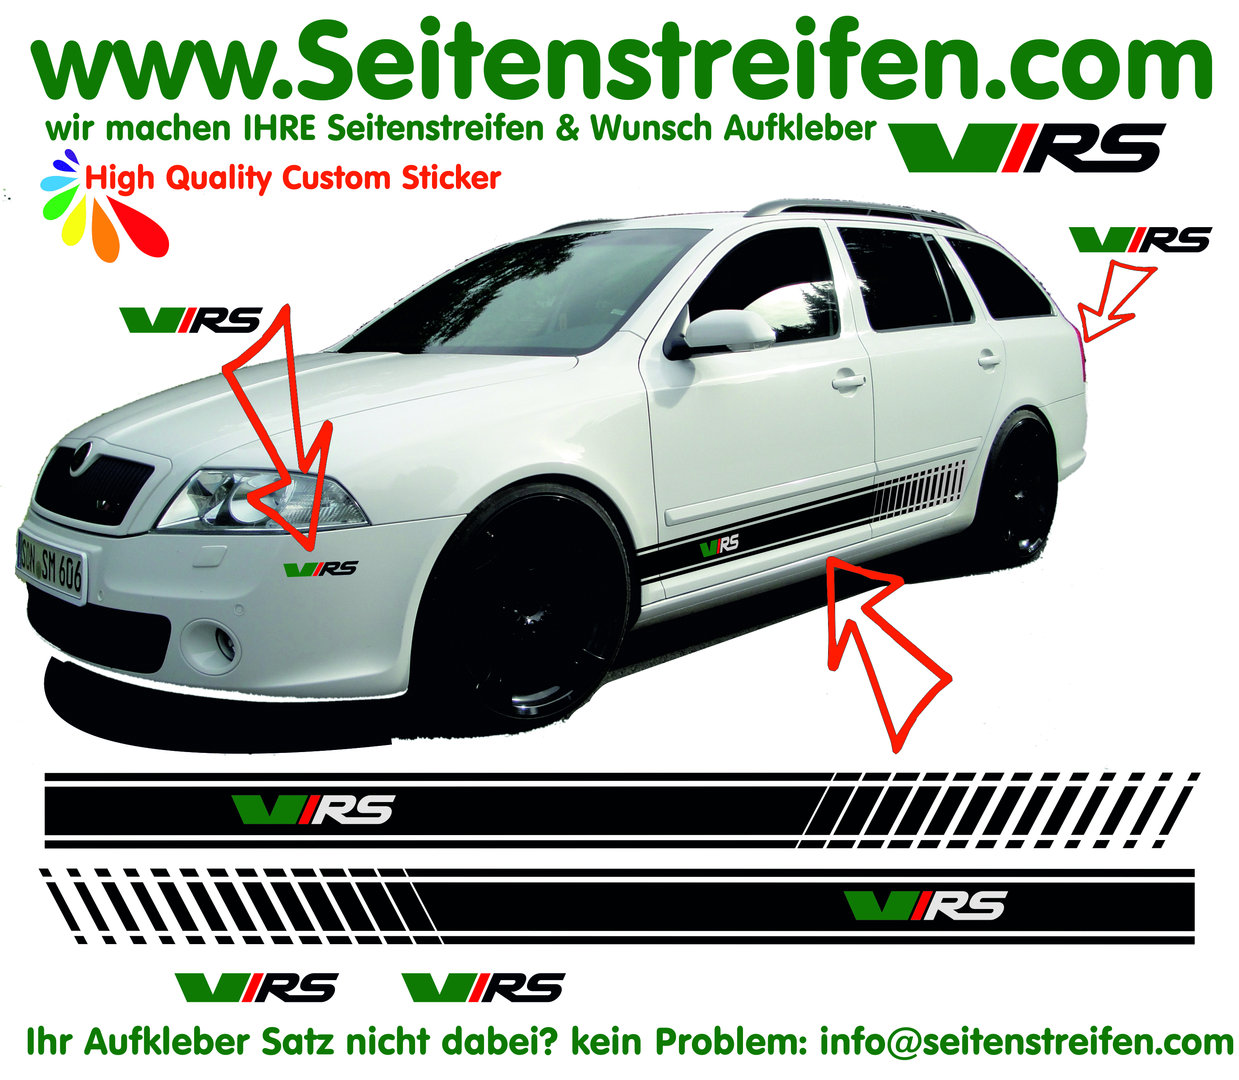 Skoda Octavia - for Combi and Limo all models till today VRS Bicolor - Decals Sticker Kit - N°  6256